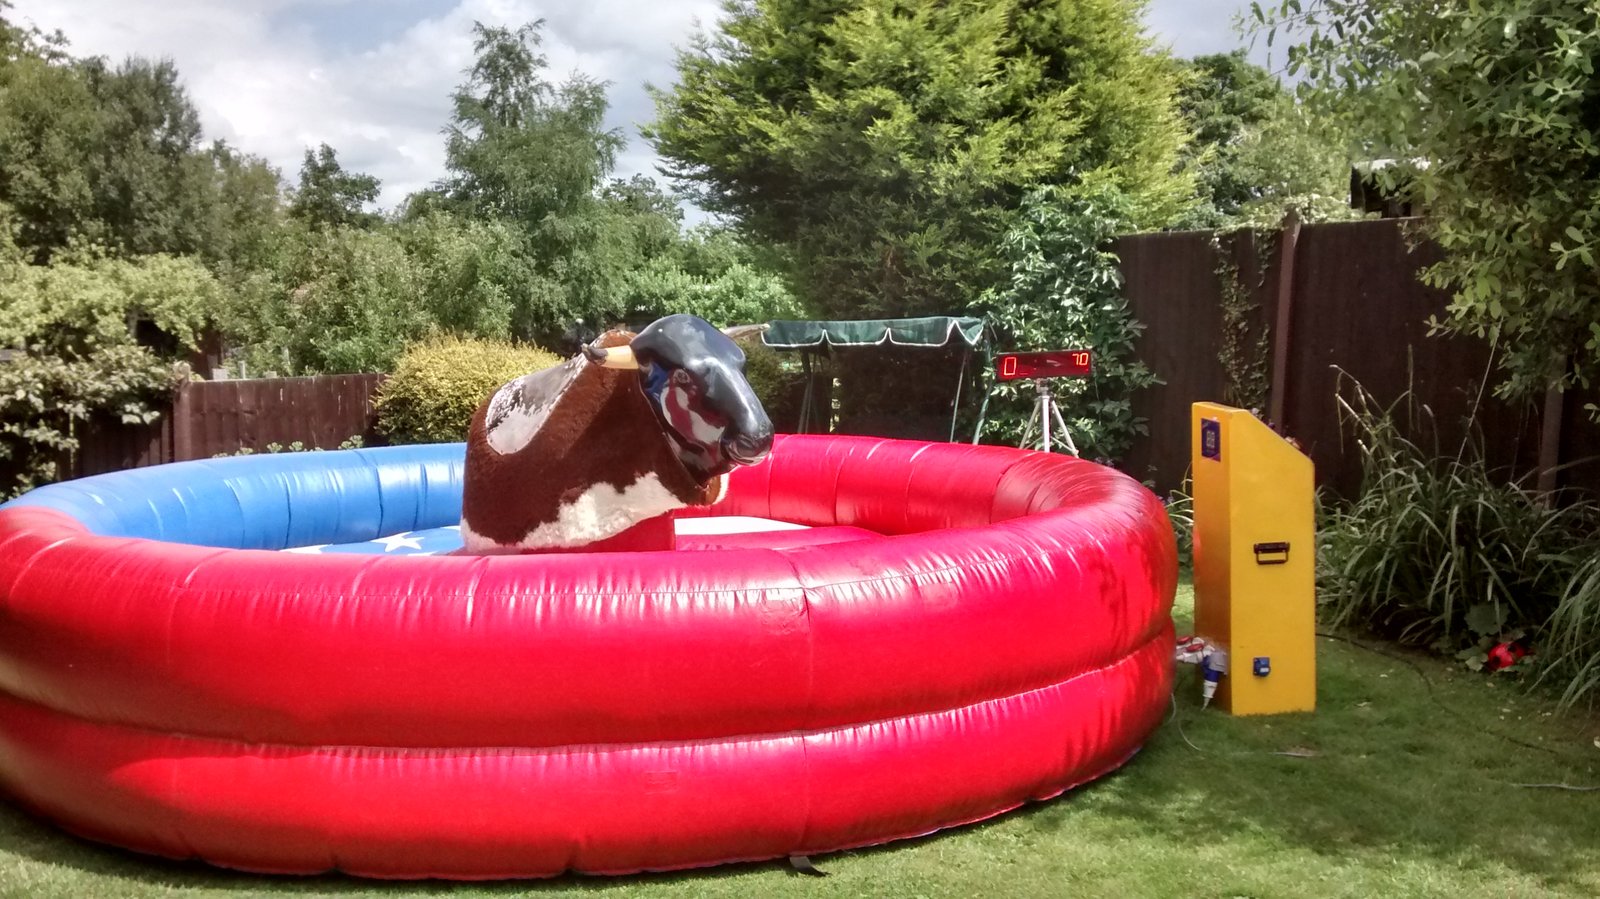 How To Protect Yourself When Riding The Mechanical Bull?